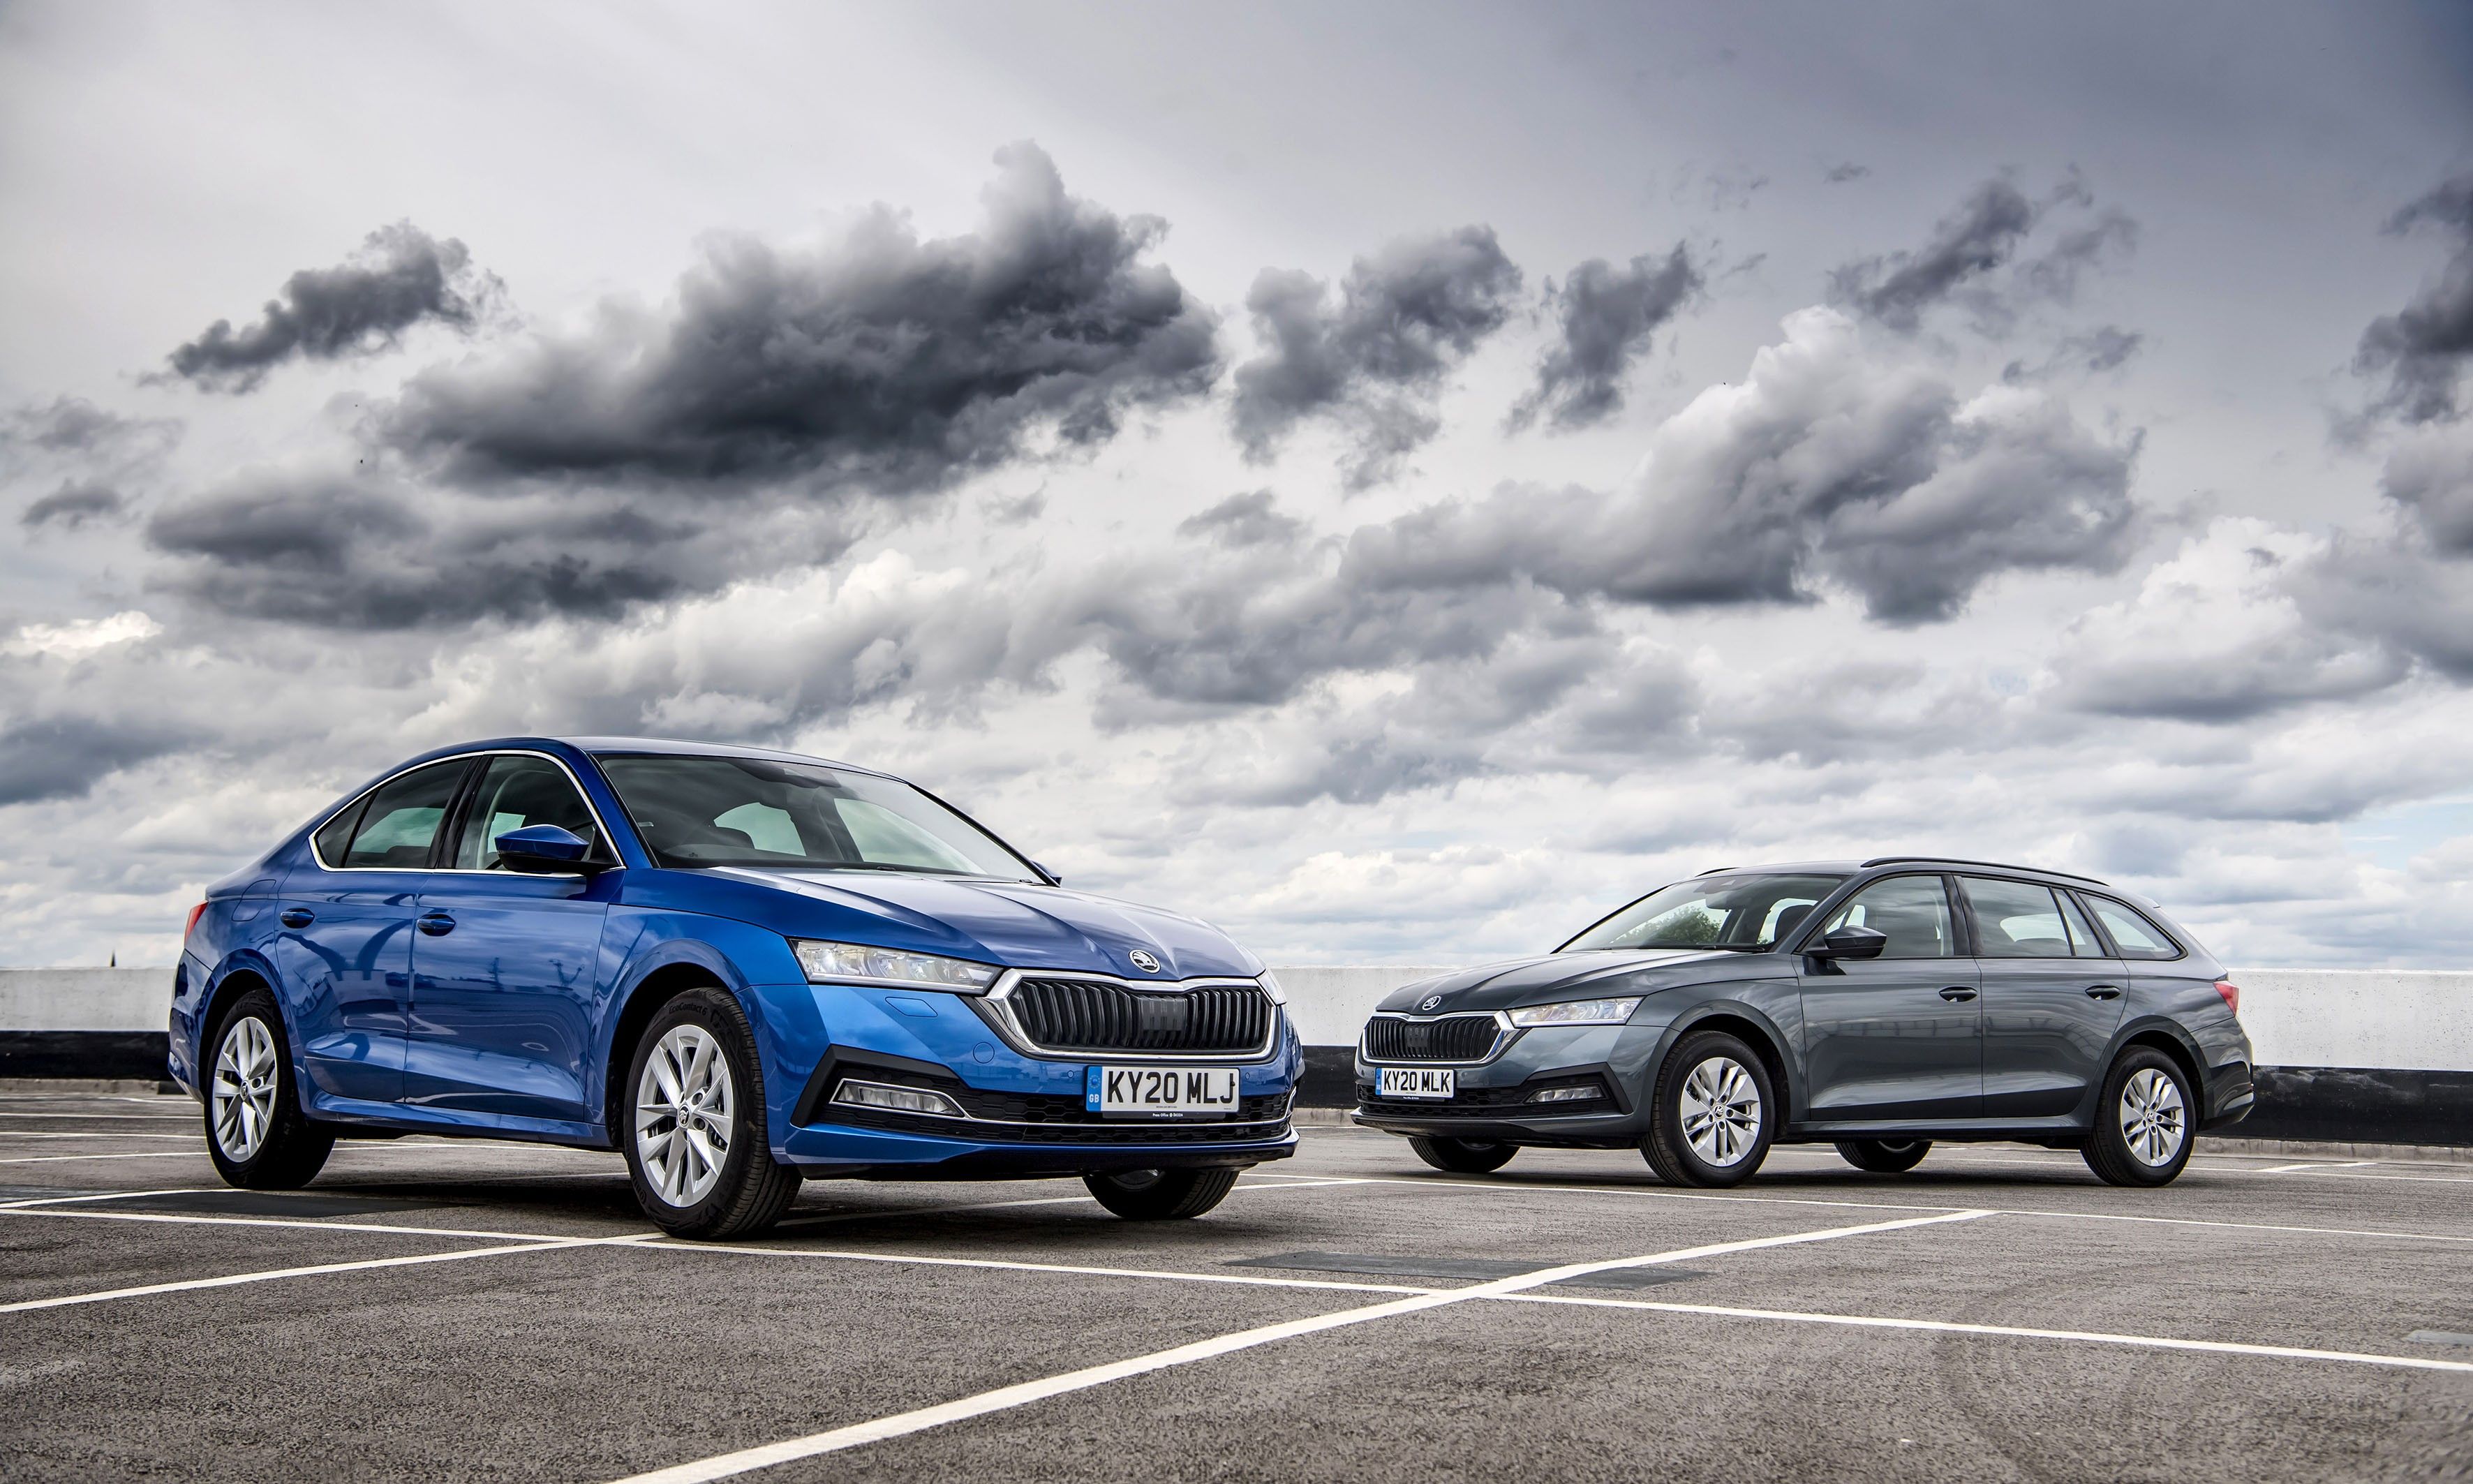 SPECIAL: The Skoda Octavia hatch and estate have won Car of the Year awards